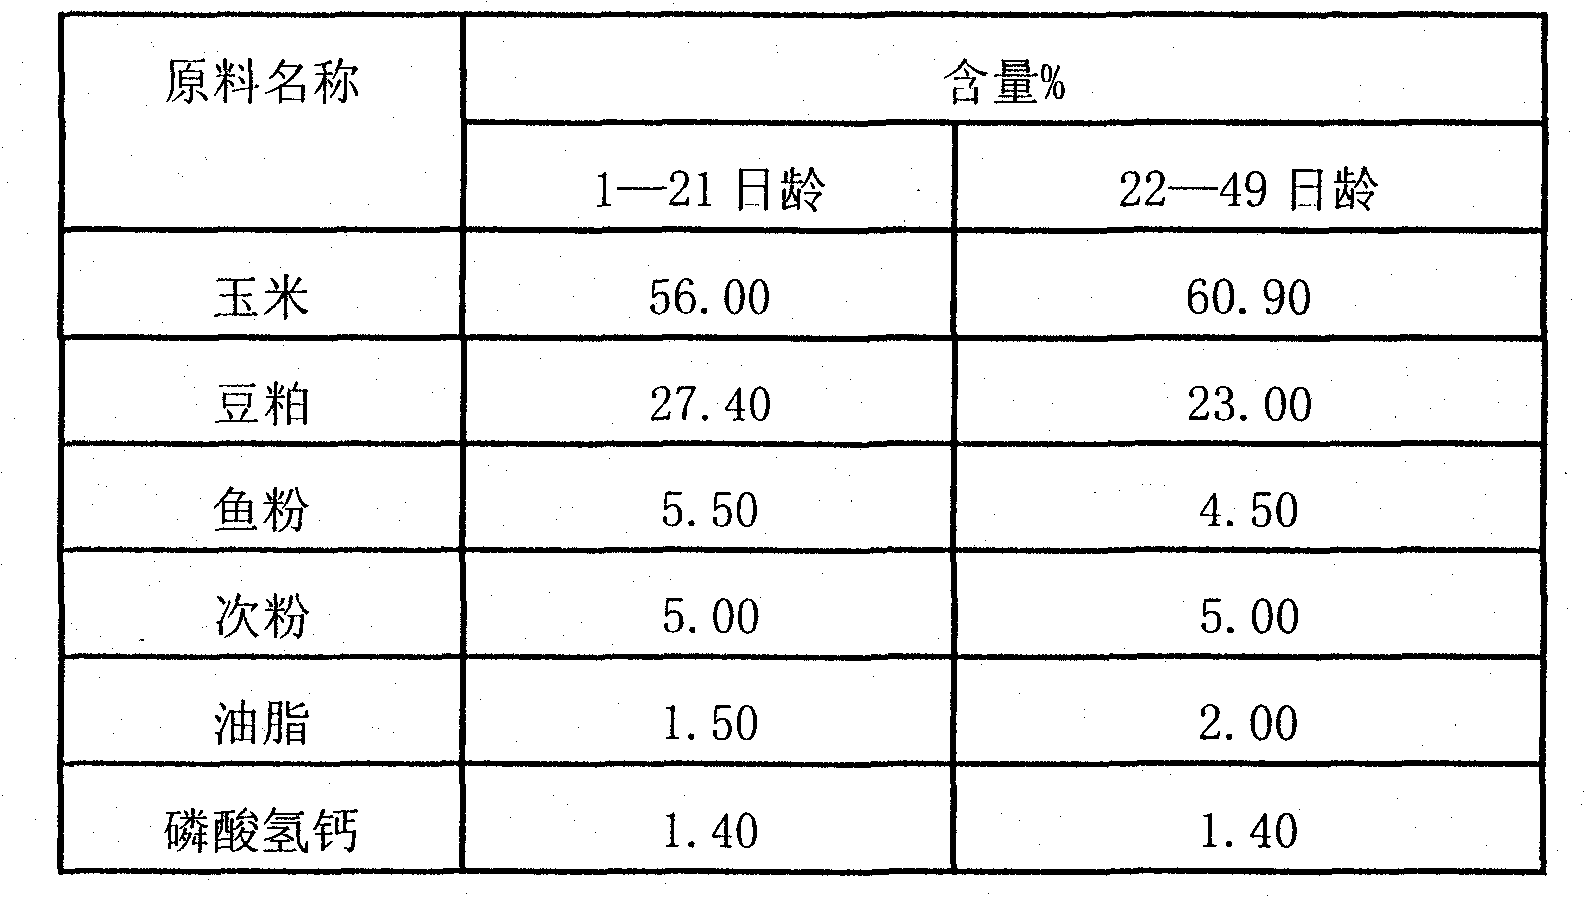 Efficient green anti-coccidiosis feed for meat chickens and preparation method thereof